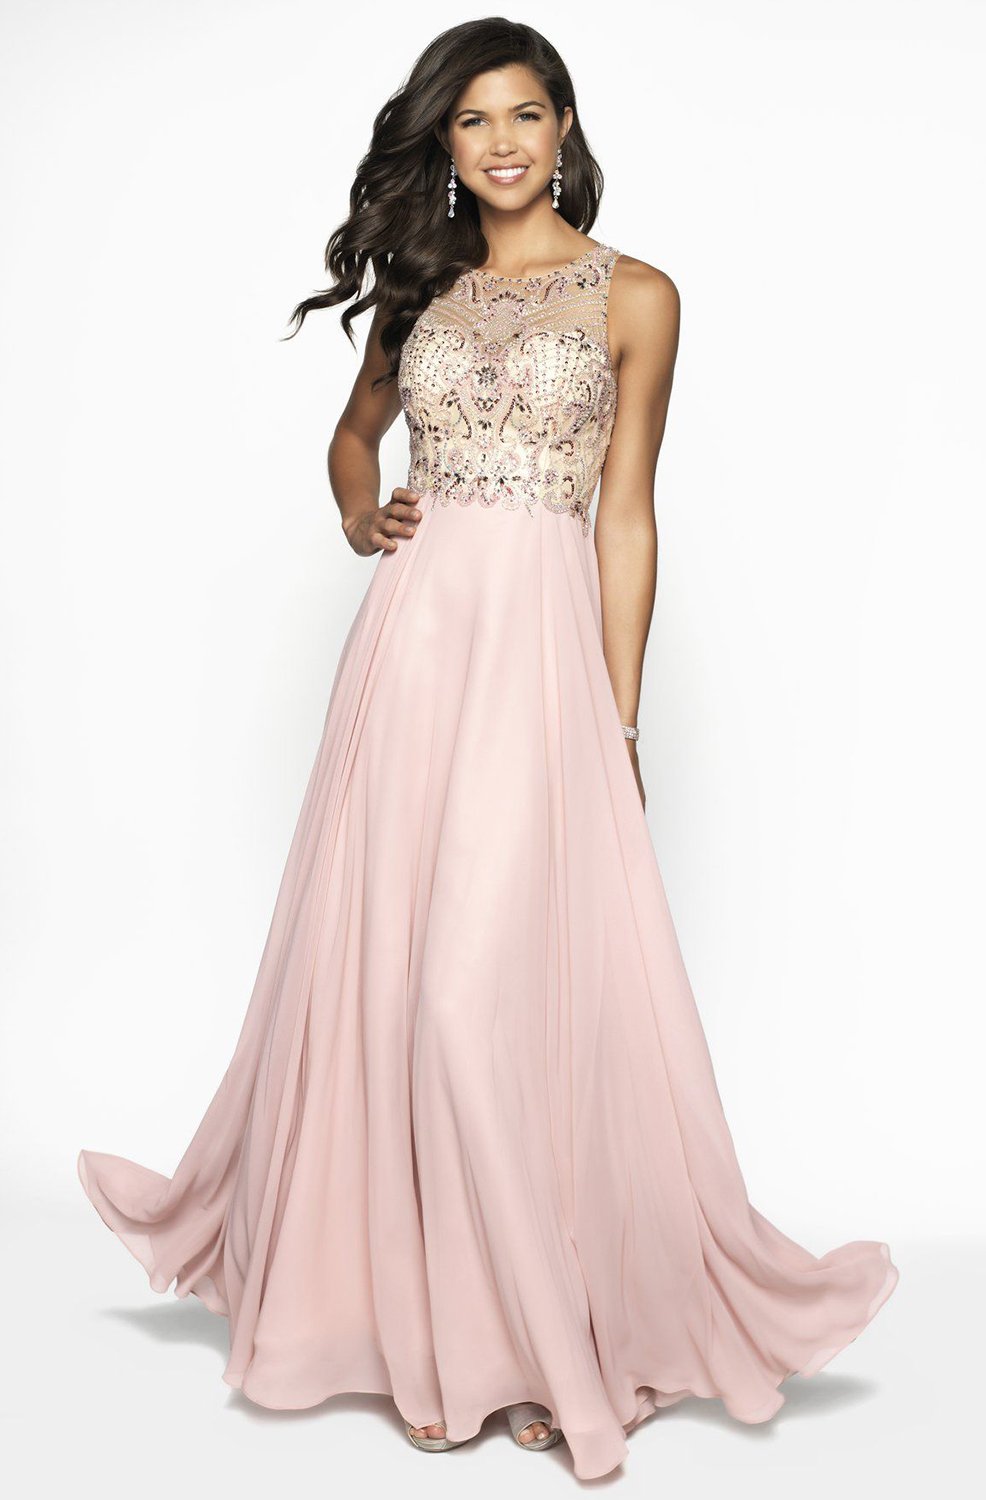 Blush by Alexia Designs - 11715 Beaded Jewel Neck Chiffon A-line Dress In Pink